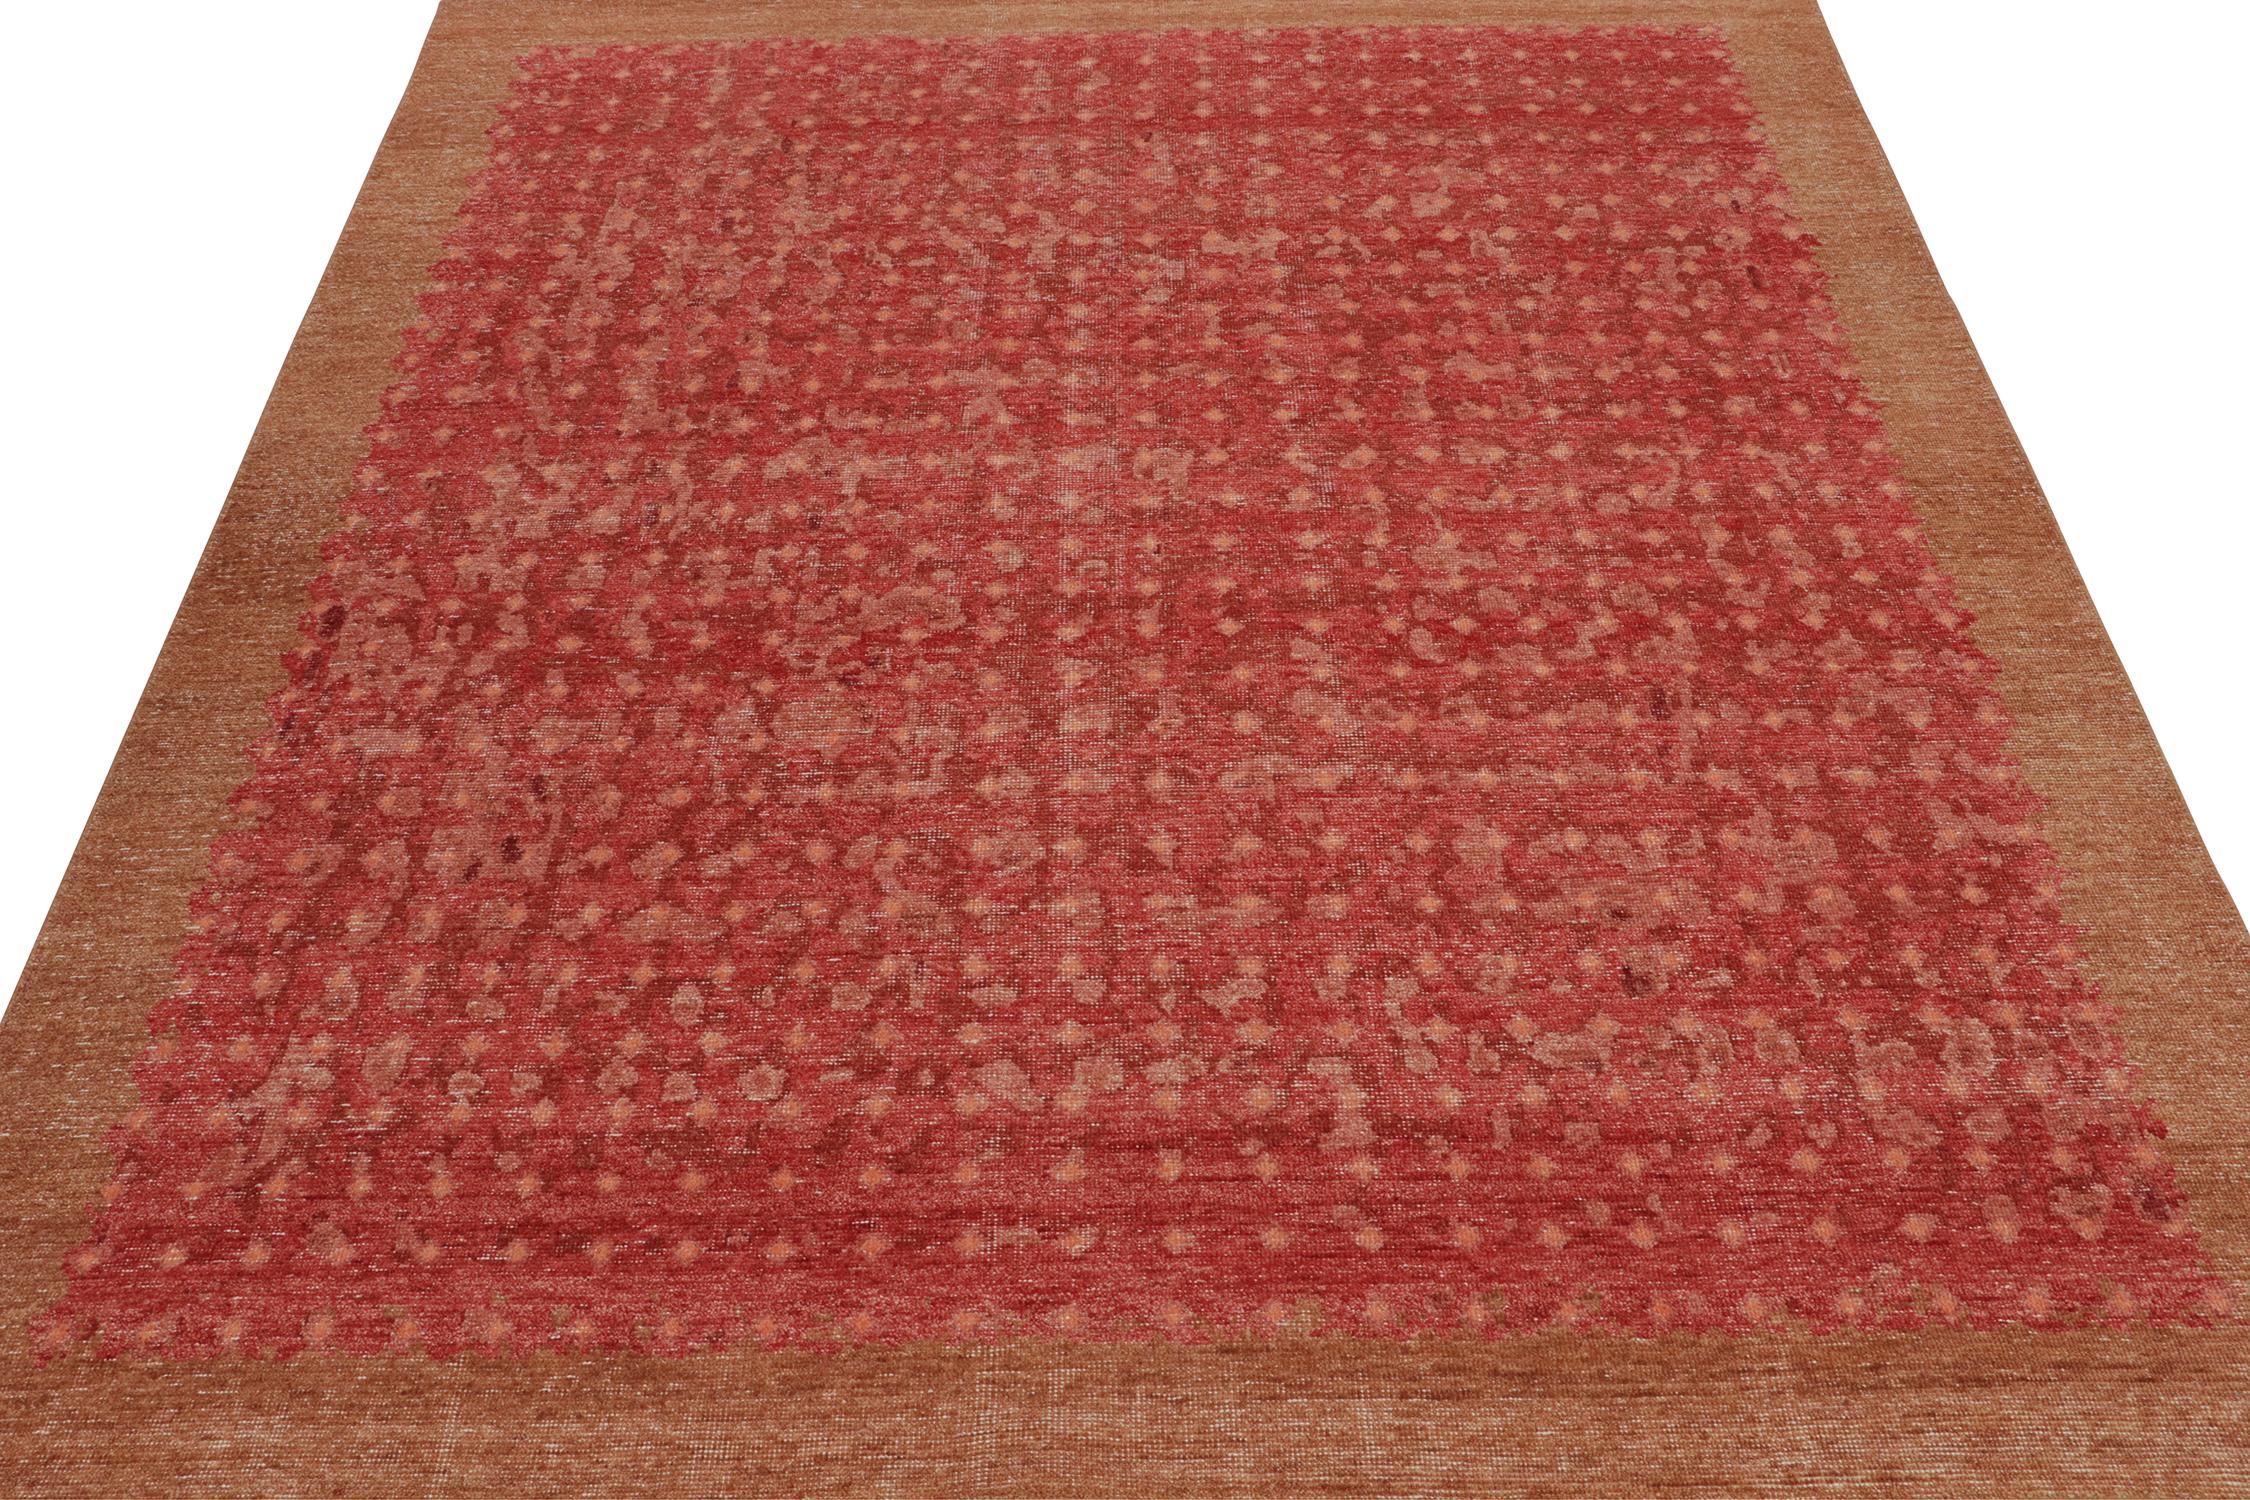 This 8x10 rug is a bold new addition to the Homage Collection by Rug & Kilim. Hand-knotted in wool and cotton, it presents a unique play of transitional rug patterns and Rustic Modern design.

Further on the Design:

This particular design draws the